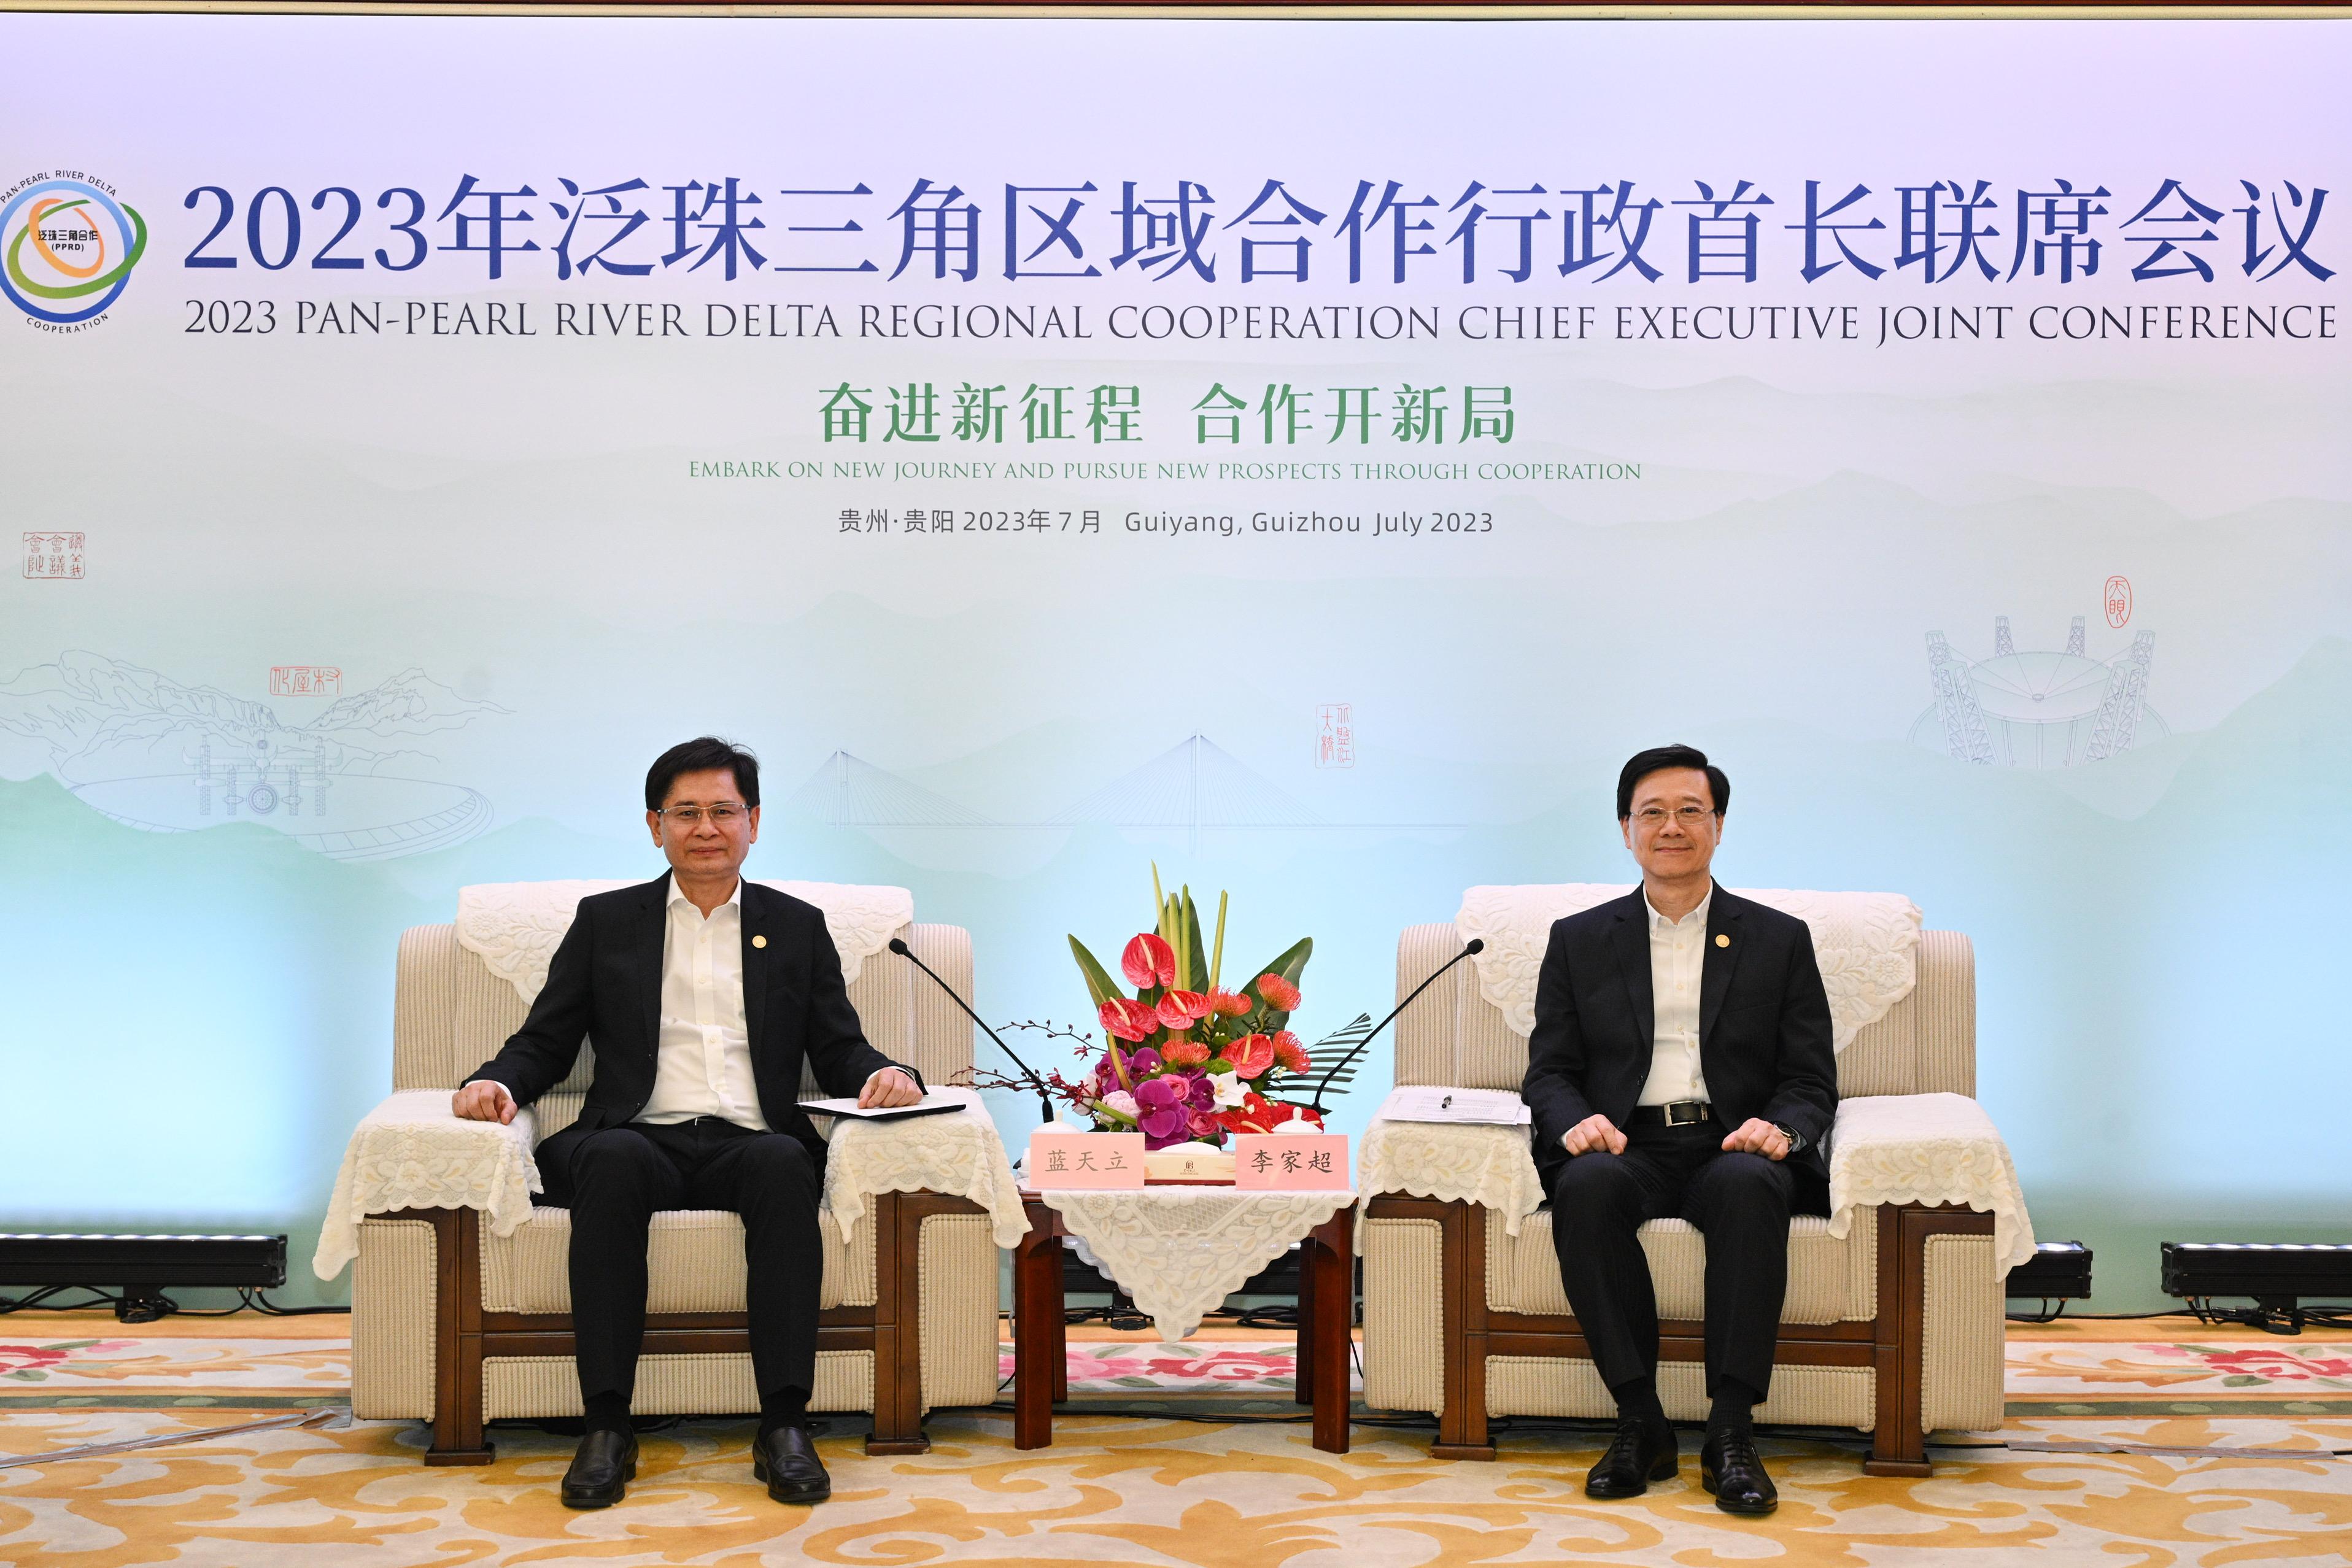 The Chief Executive, Mr John Lee, led a delegation to visit Guiyang today (July 7). Photo shows Mr Lee (right) and the Chairman of the Guangxi Zhuang Autonomous Region, Mr Lan Tianli (left), at a bilateral meeting in Guiyang.